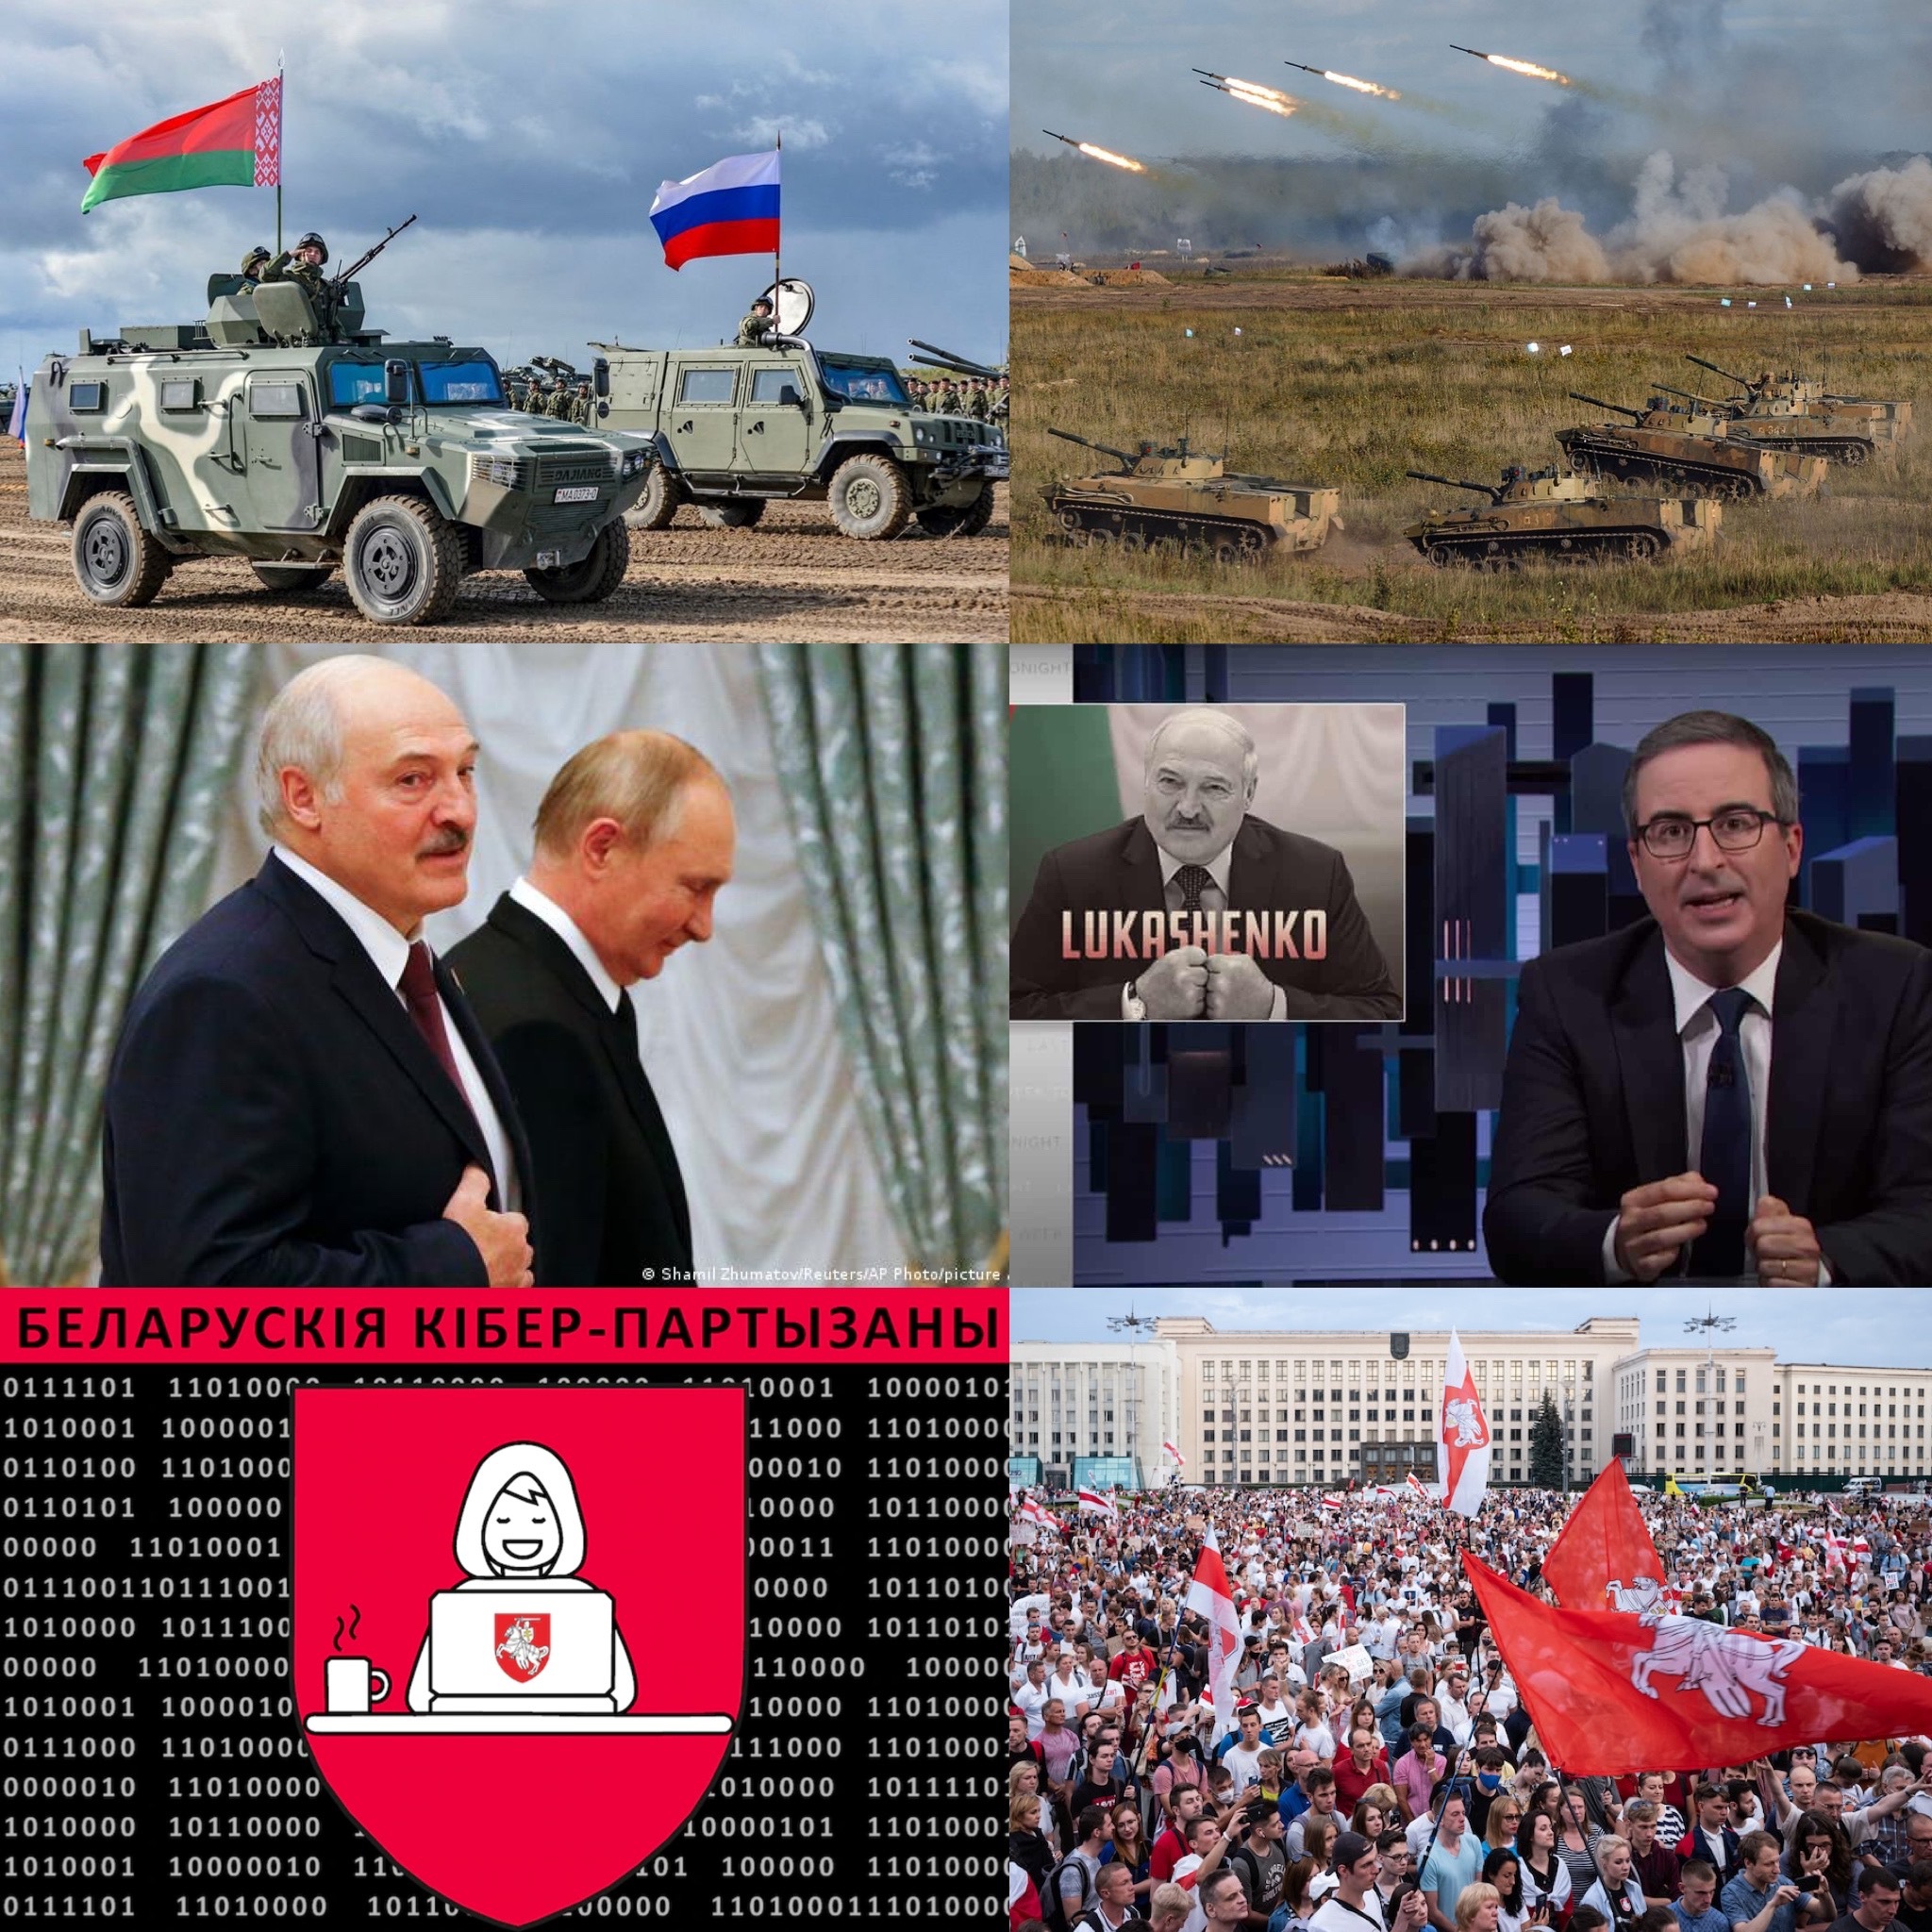 This past week: Tensions over Zapad 2021 military exercises continue to escalate, as Cyber Partisans find new ways to expose Lukashenka’s secrets.